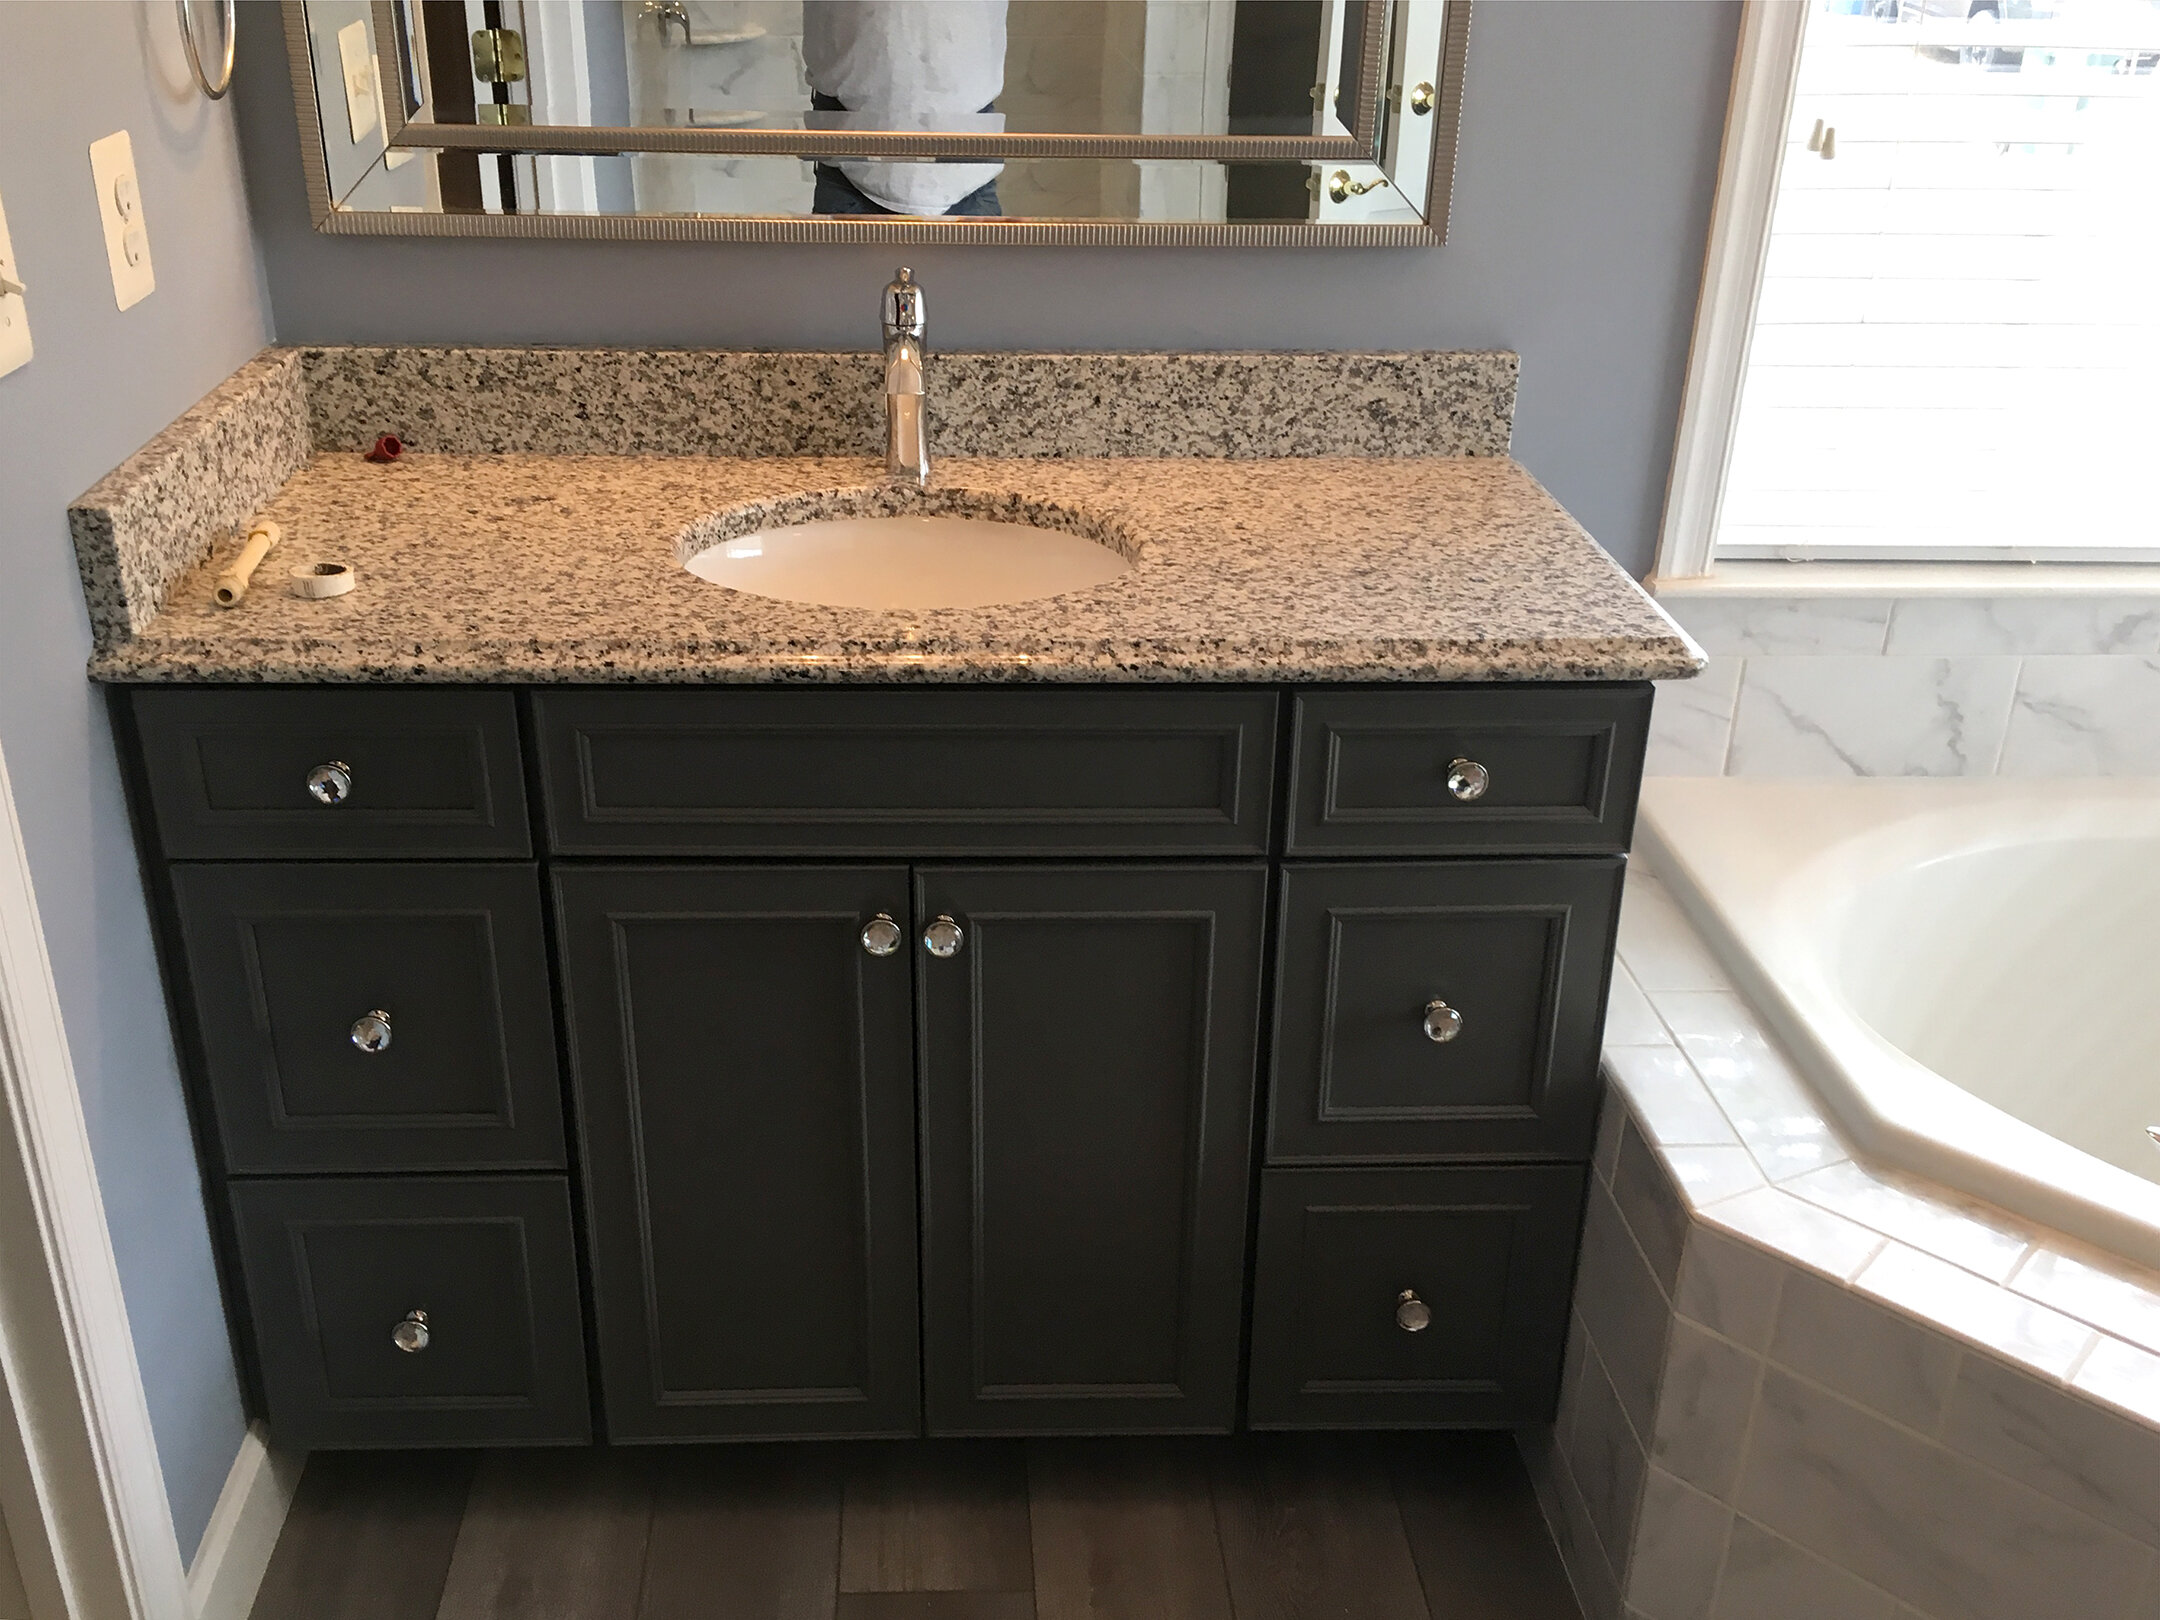  This cabinet is finished with a Luna Pearl granite countertop. 